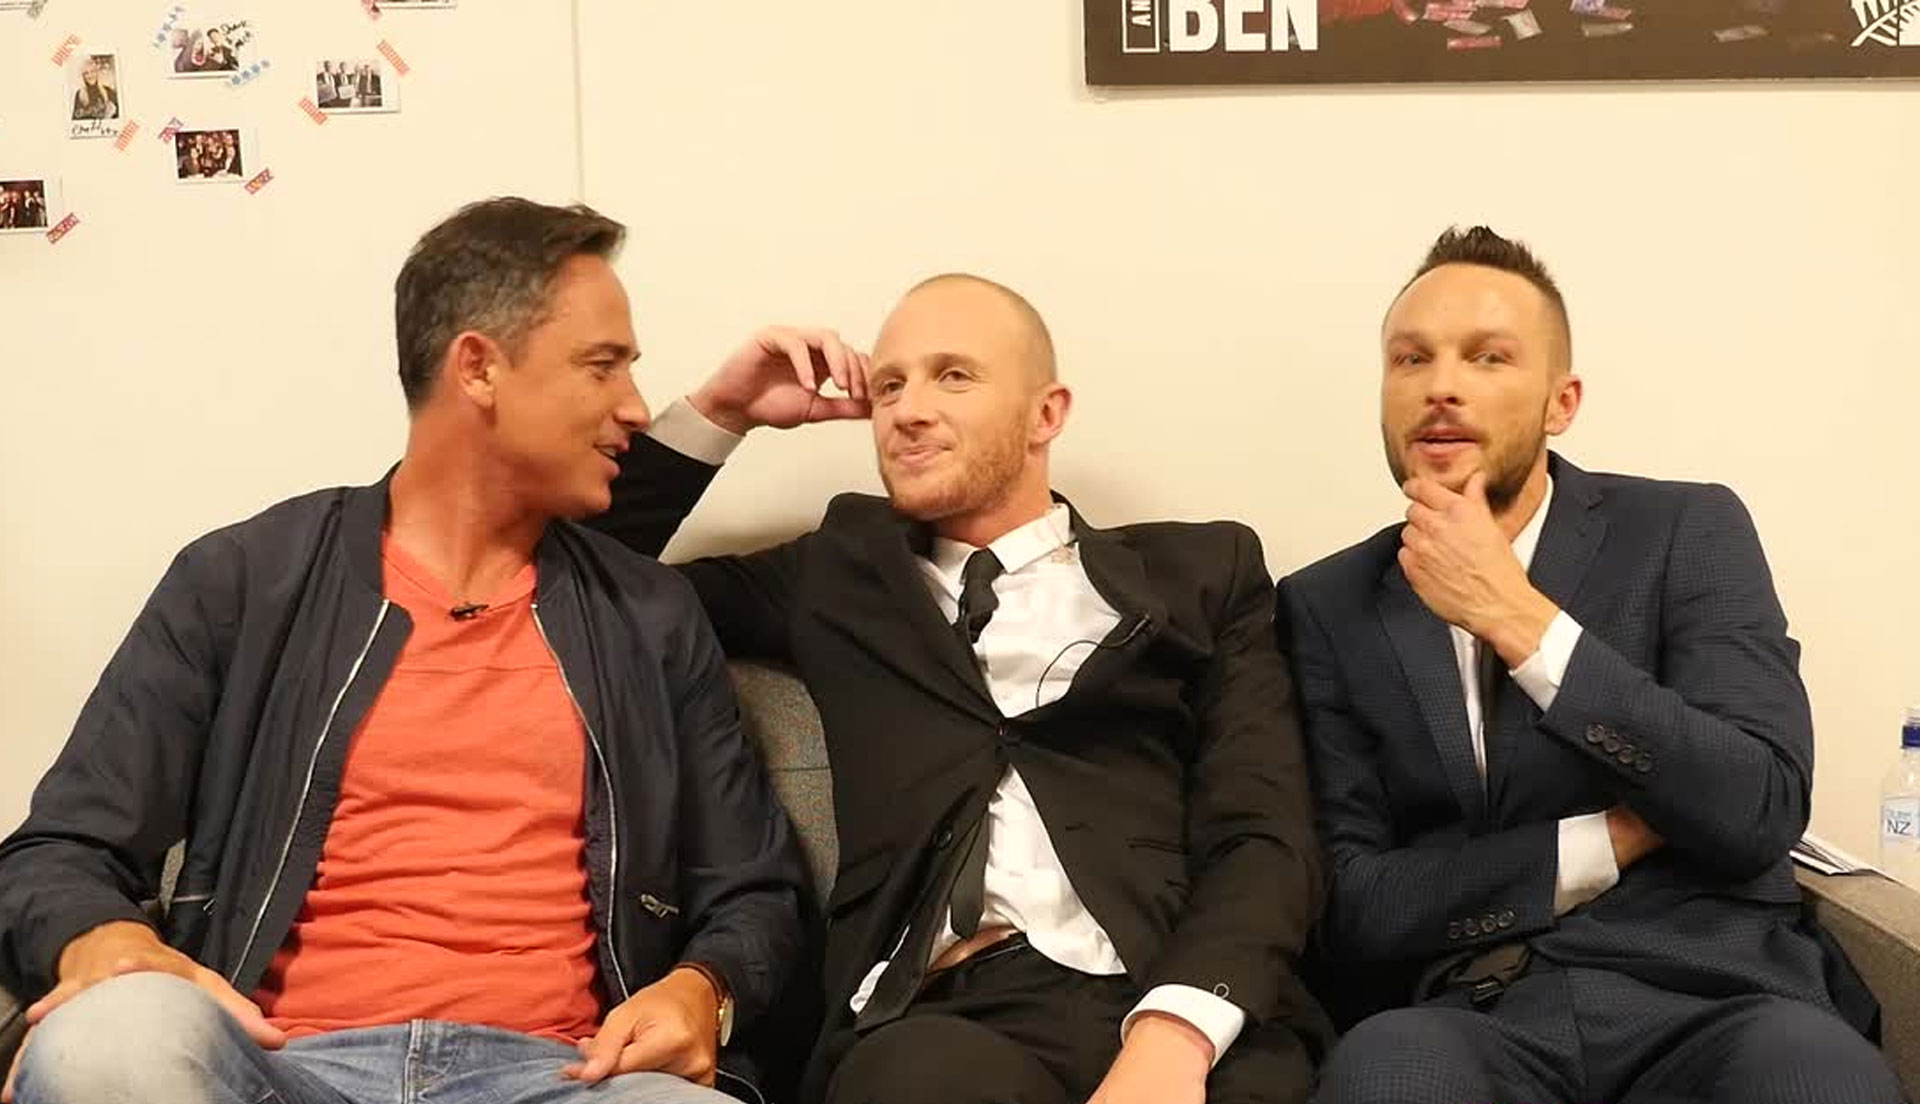 Watch: Jono and Ben get candid